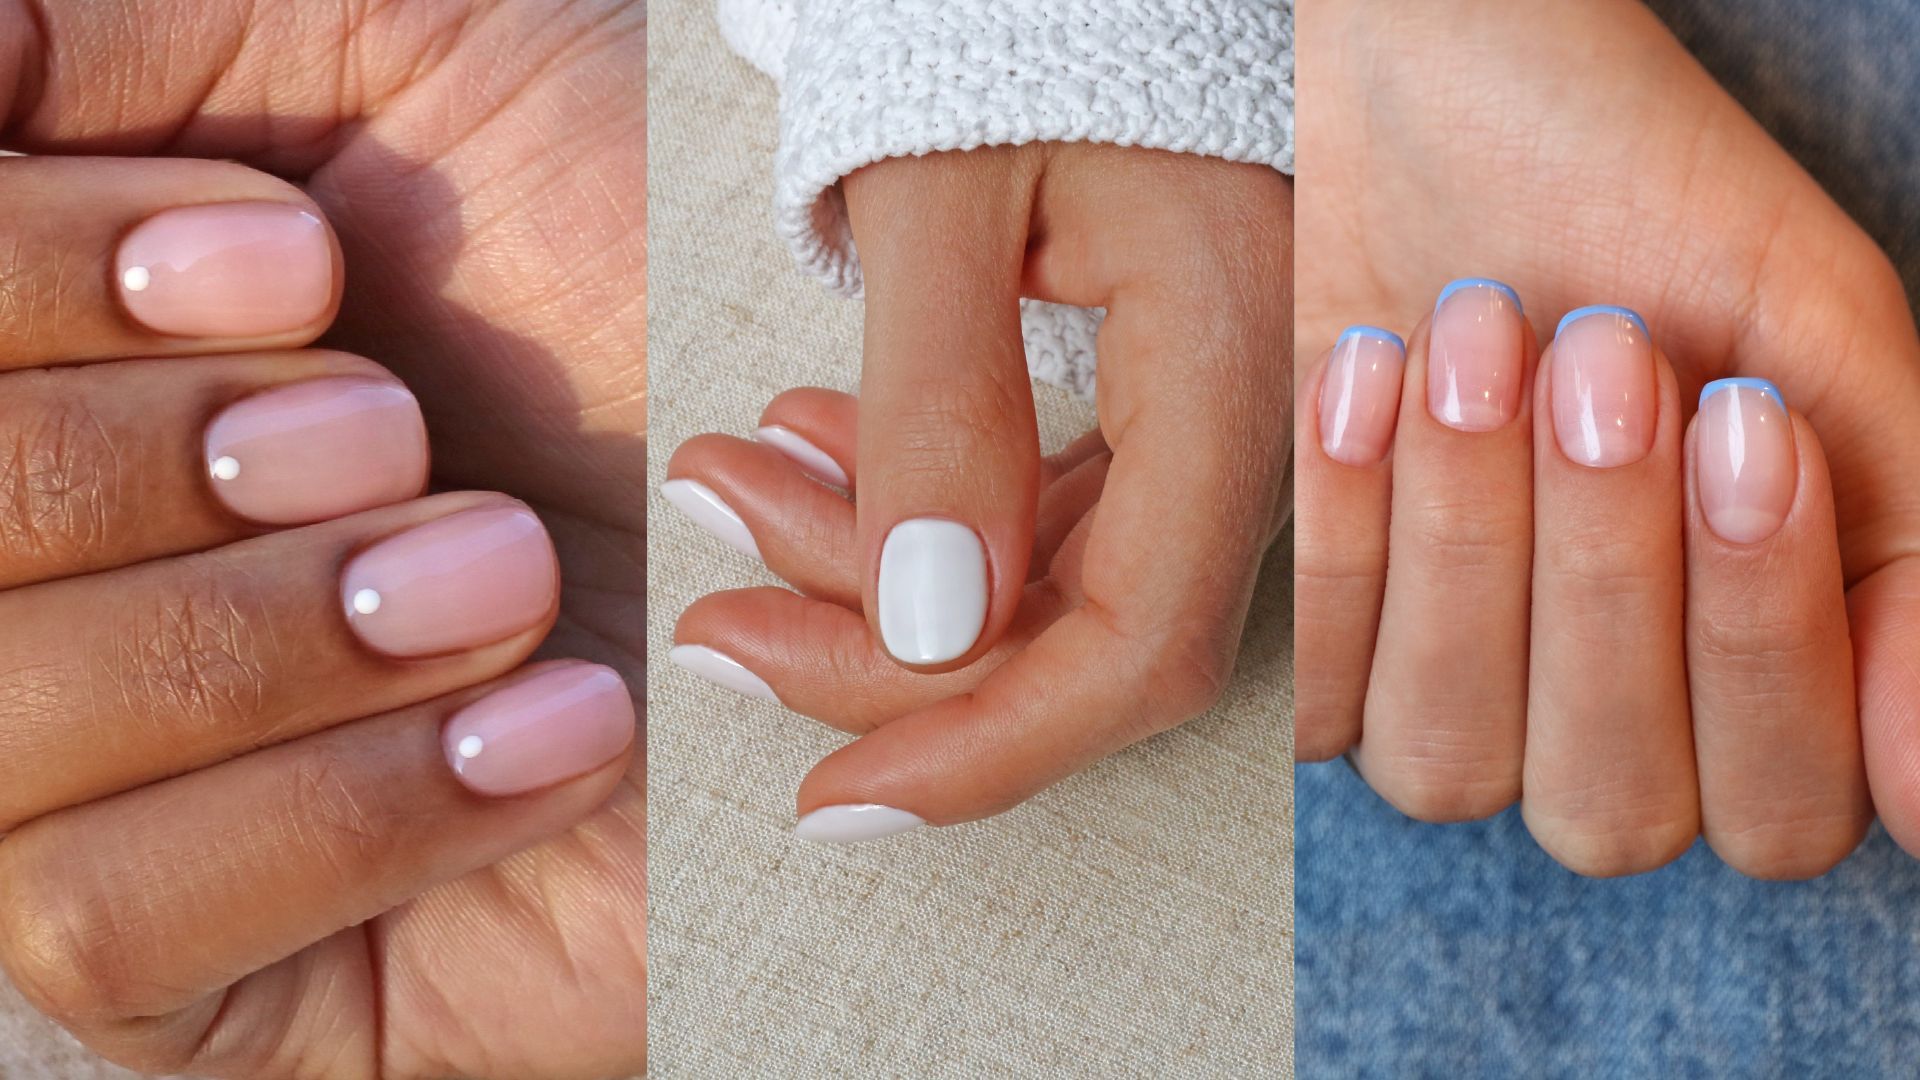 2. "Trendy Nail Colors to Try in August: From Brights to Neutrals" - wide 1